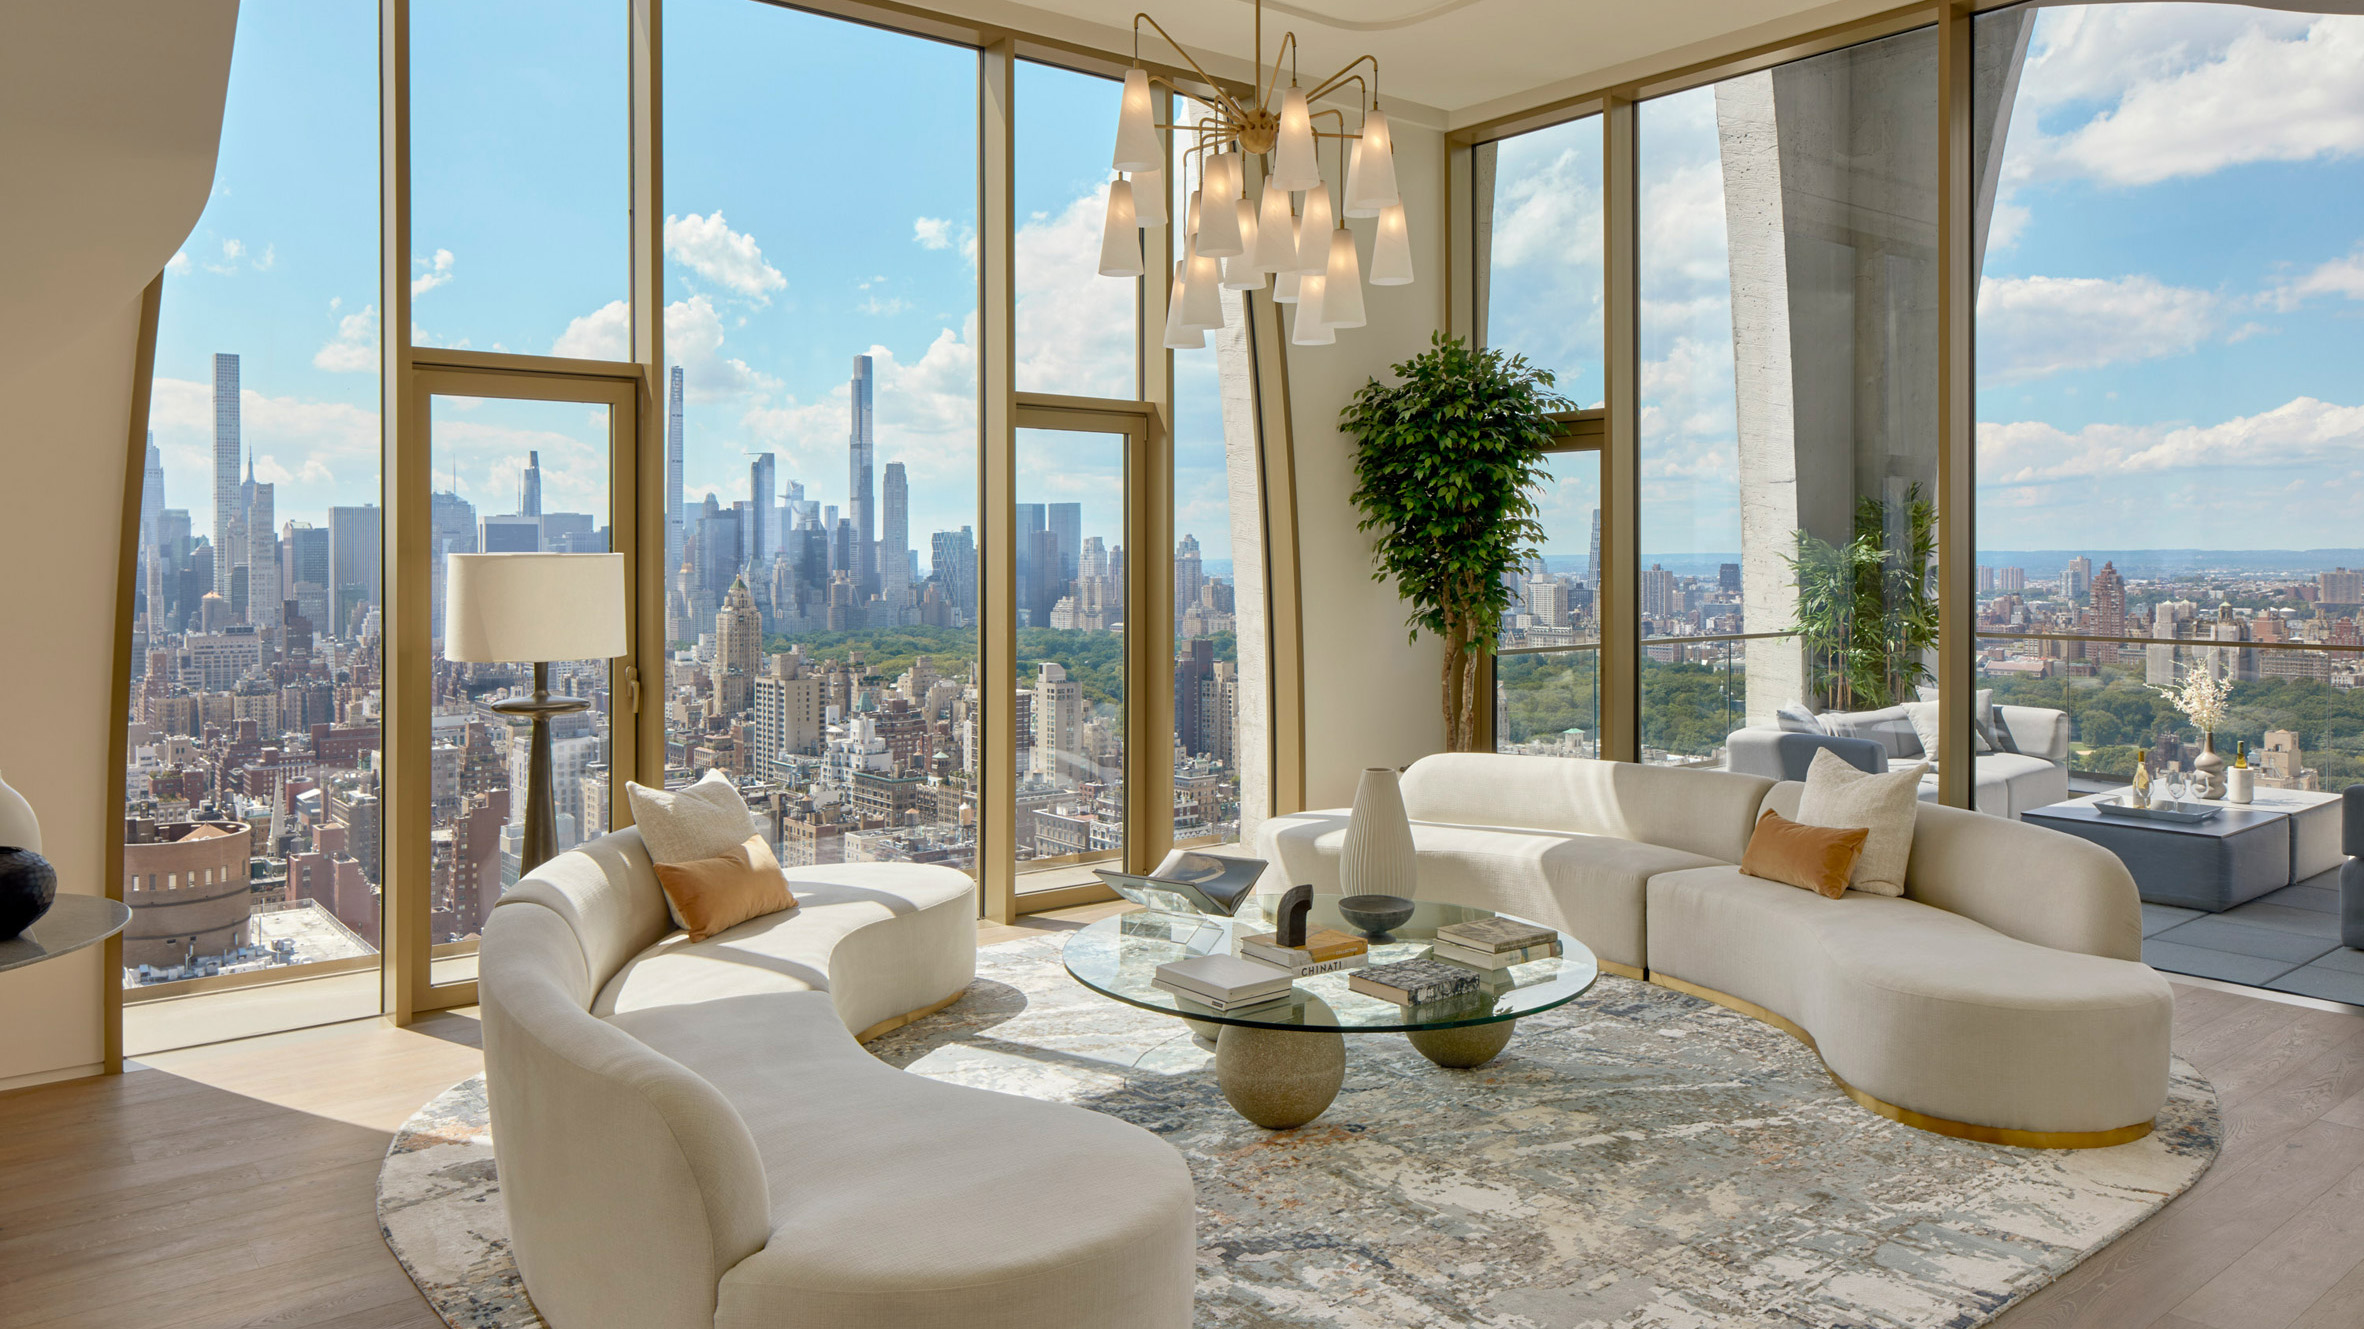 DDG and IMG outfit penthouse at Manhattan's 180 East 88th Street tower